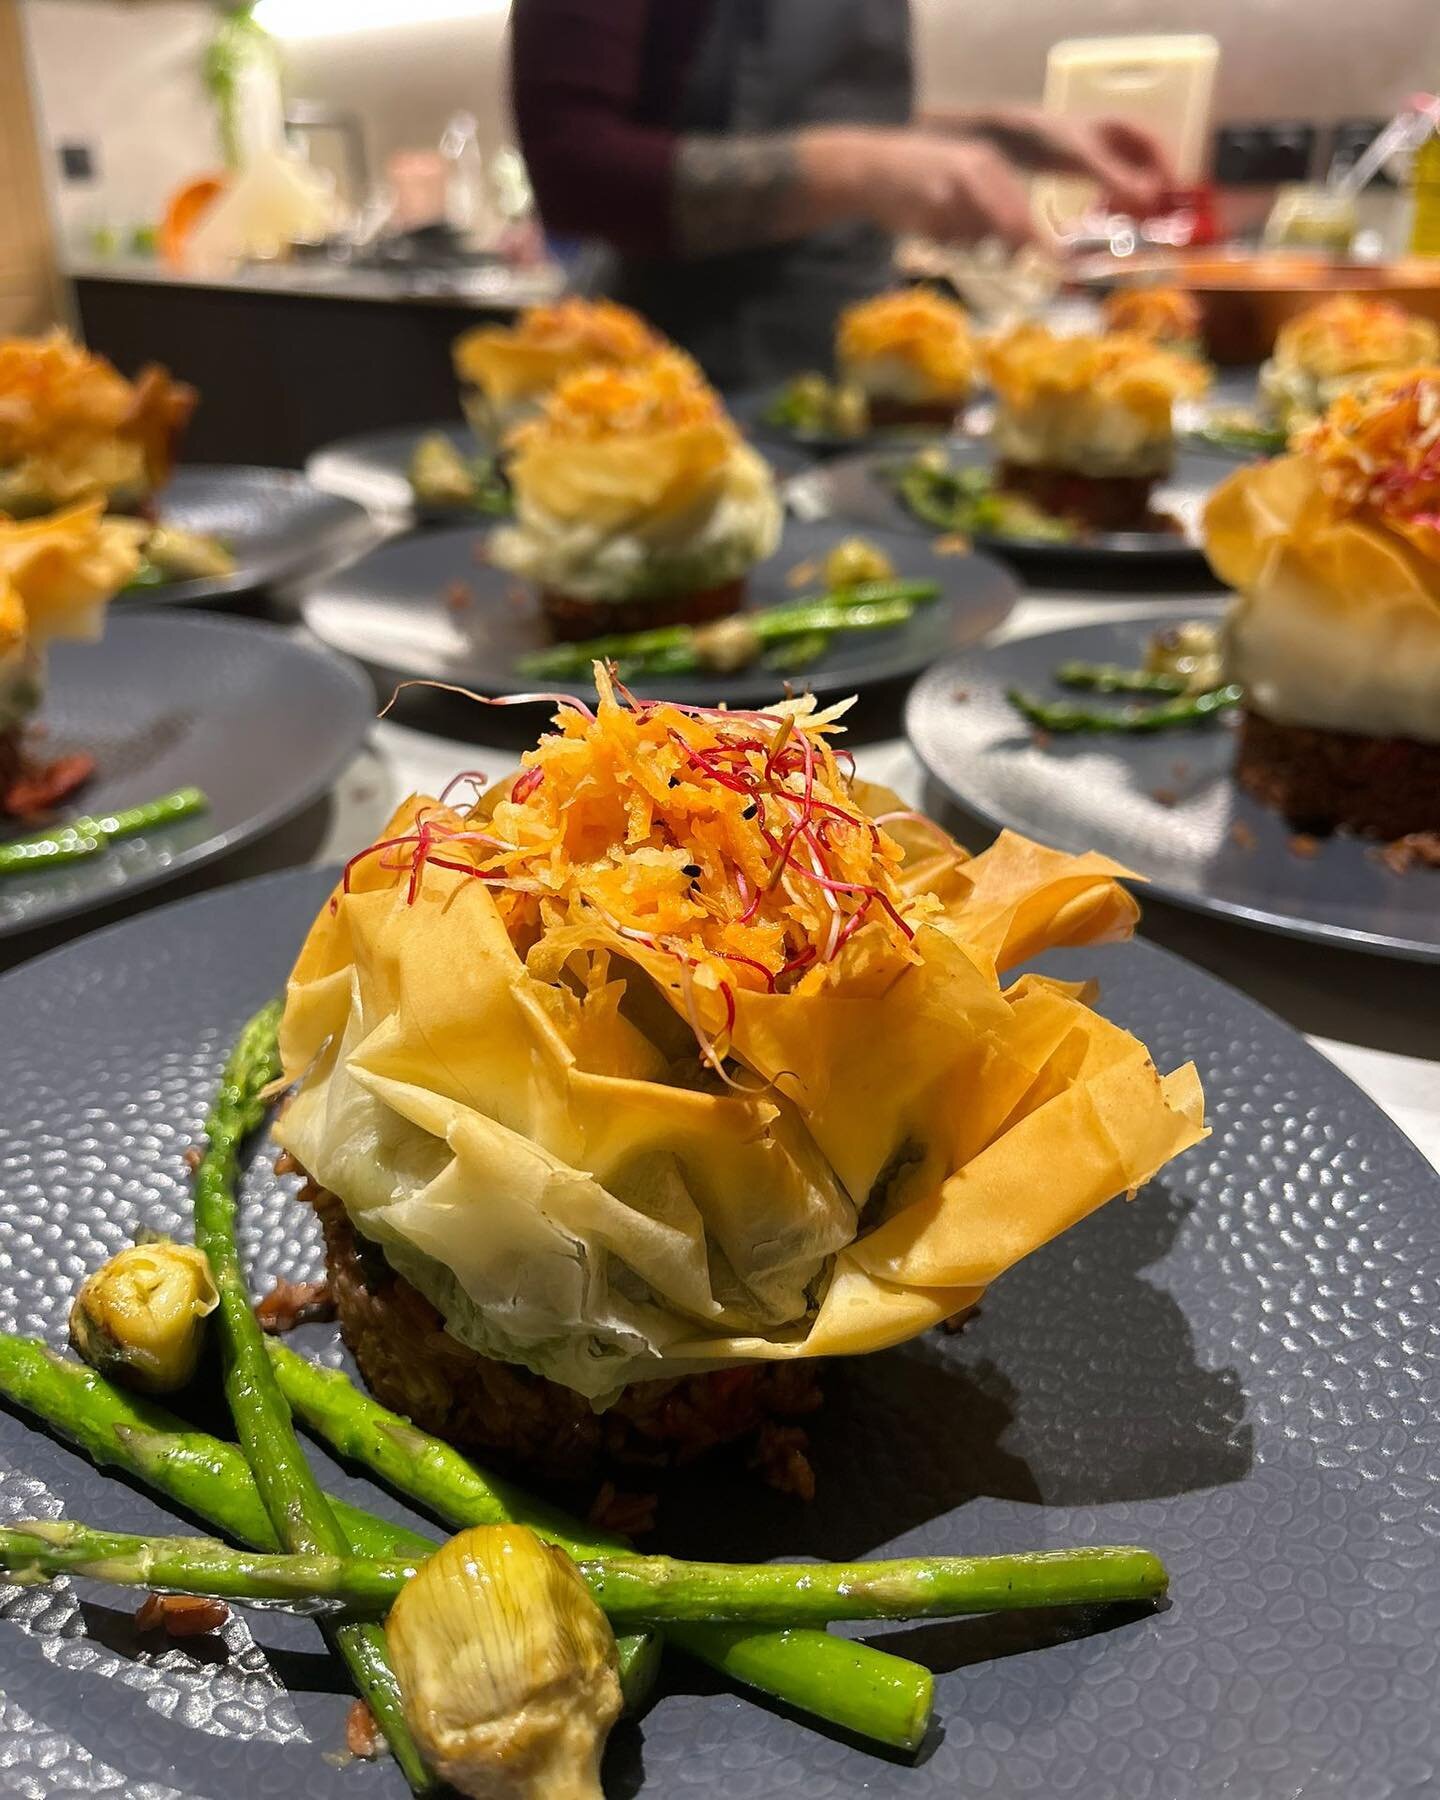 🌱 pea, spinach &amp; spring herb filo parcel on a bed of sweet pepper red rice. topped with preserved lemon &amp; olive tapenade, carrot fennel slaw and beetroot sprouts. served with grilled asparagus &amp; baby artichokes 
.
#retreatchef #plantbase